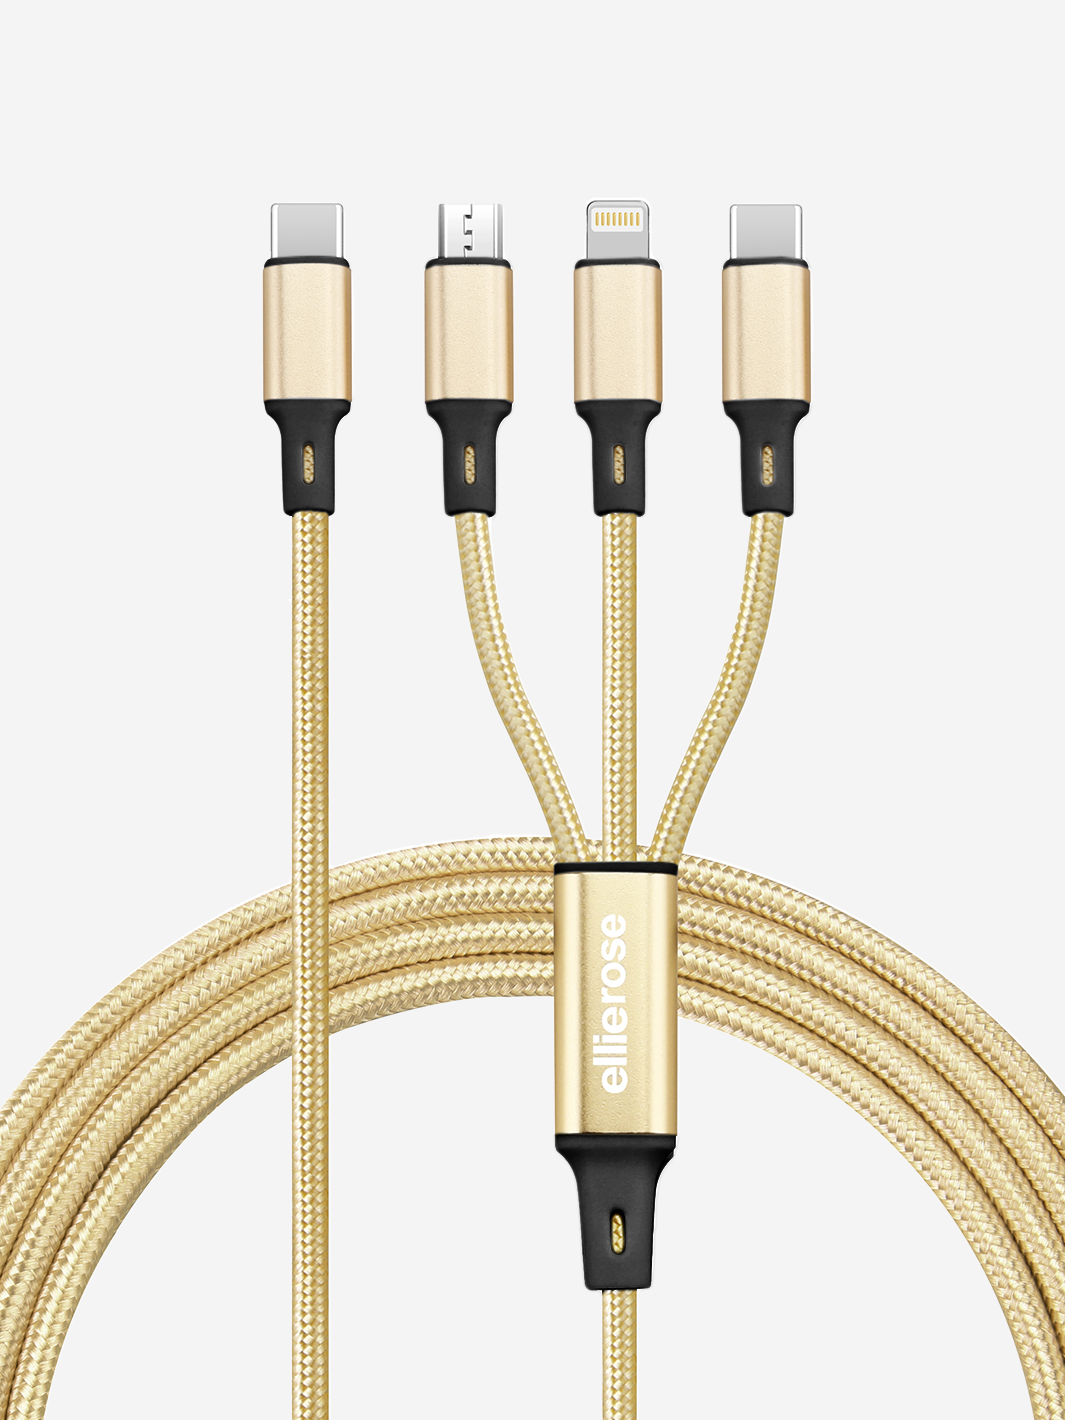 USB-C Gold 3-in-1 Charging Cable